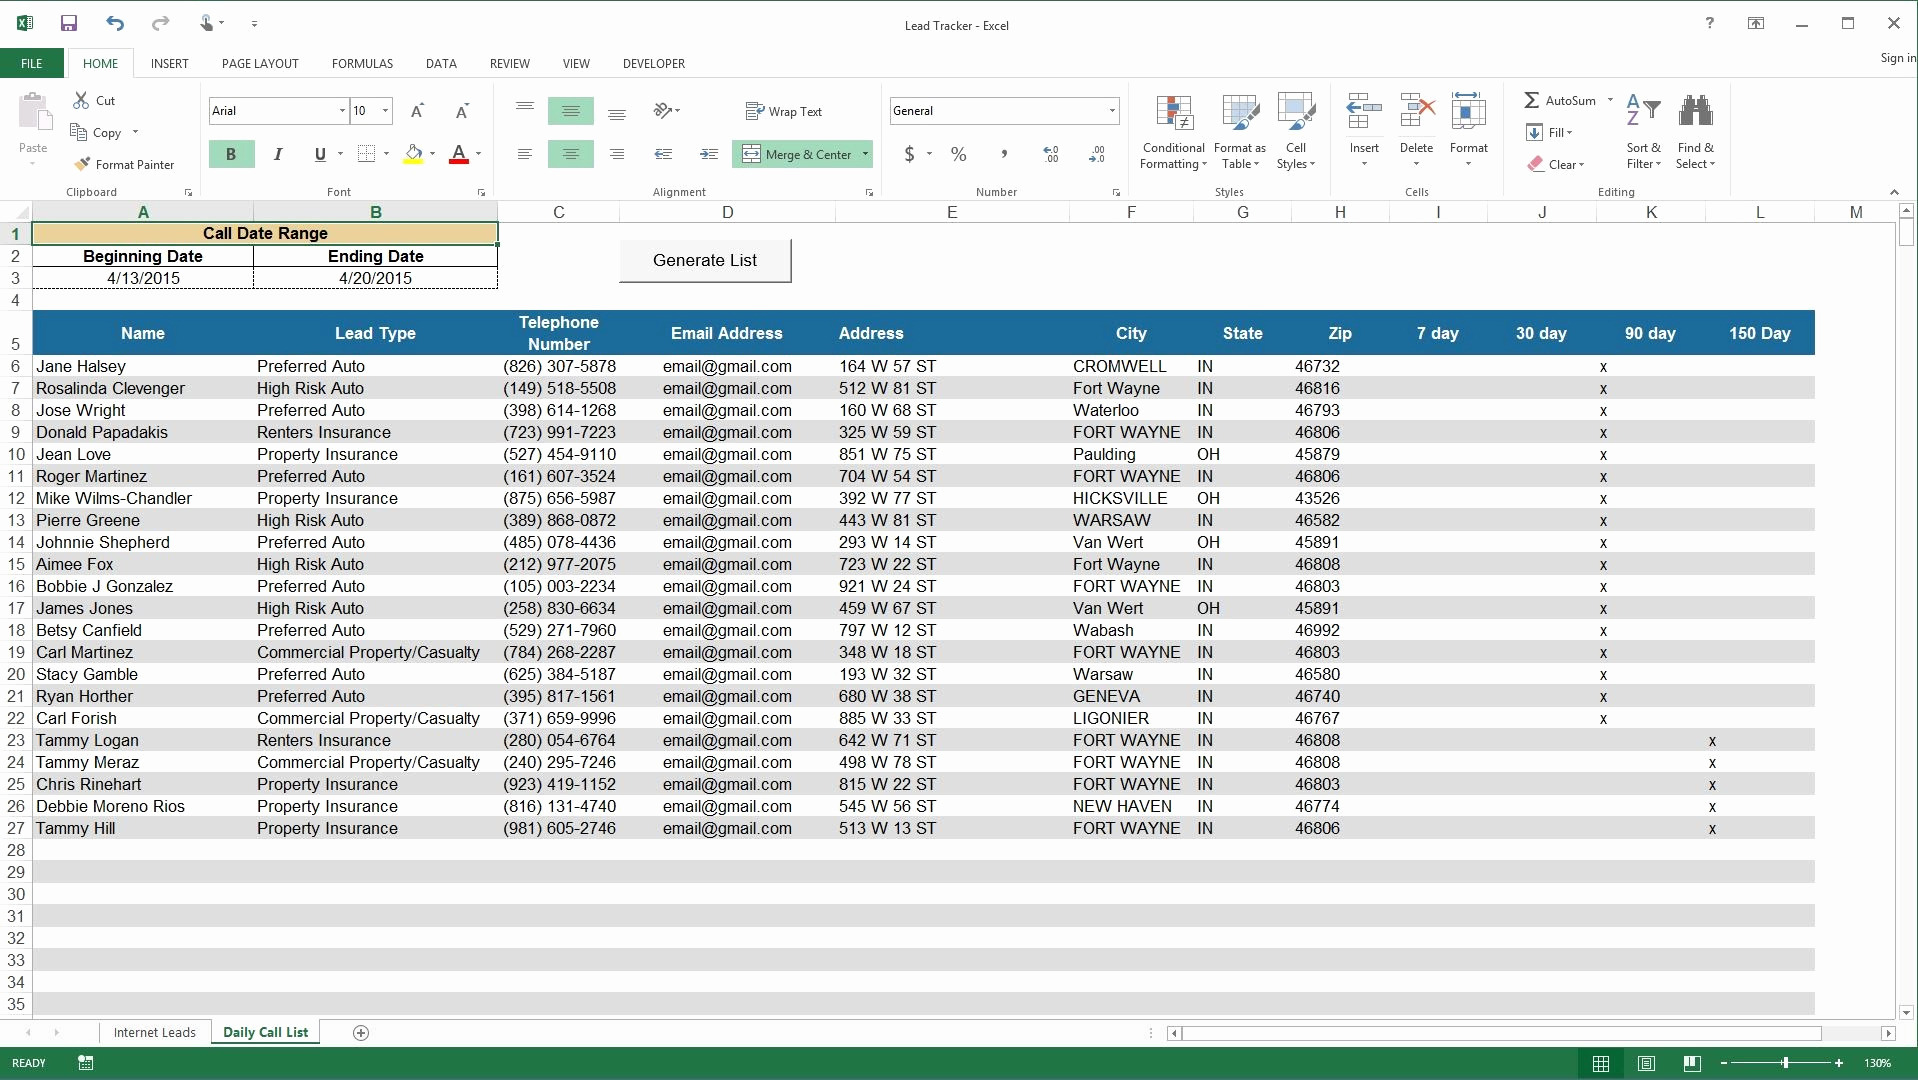 Real Estate Lead Tracking Sheet Awesome Lead Tracking Spreadsheet Inside Real Estate Lead Tracking Spreadsheet